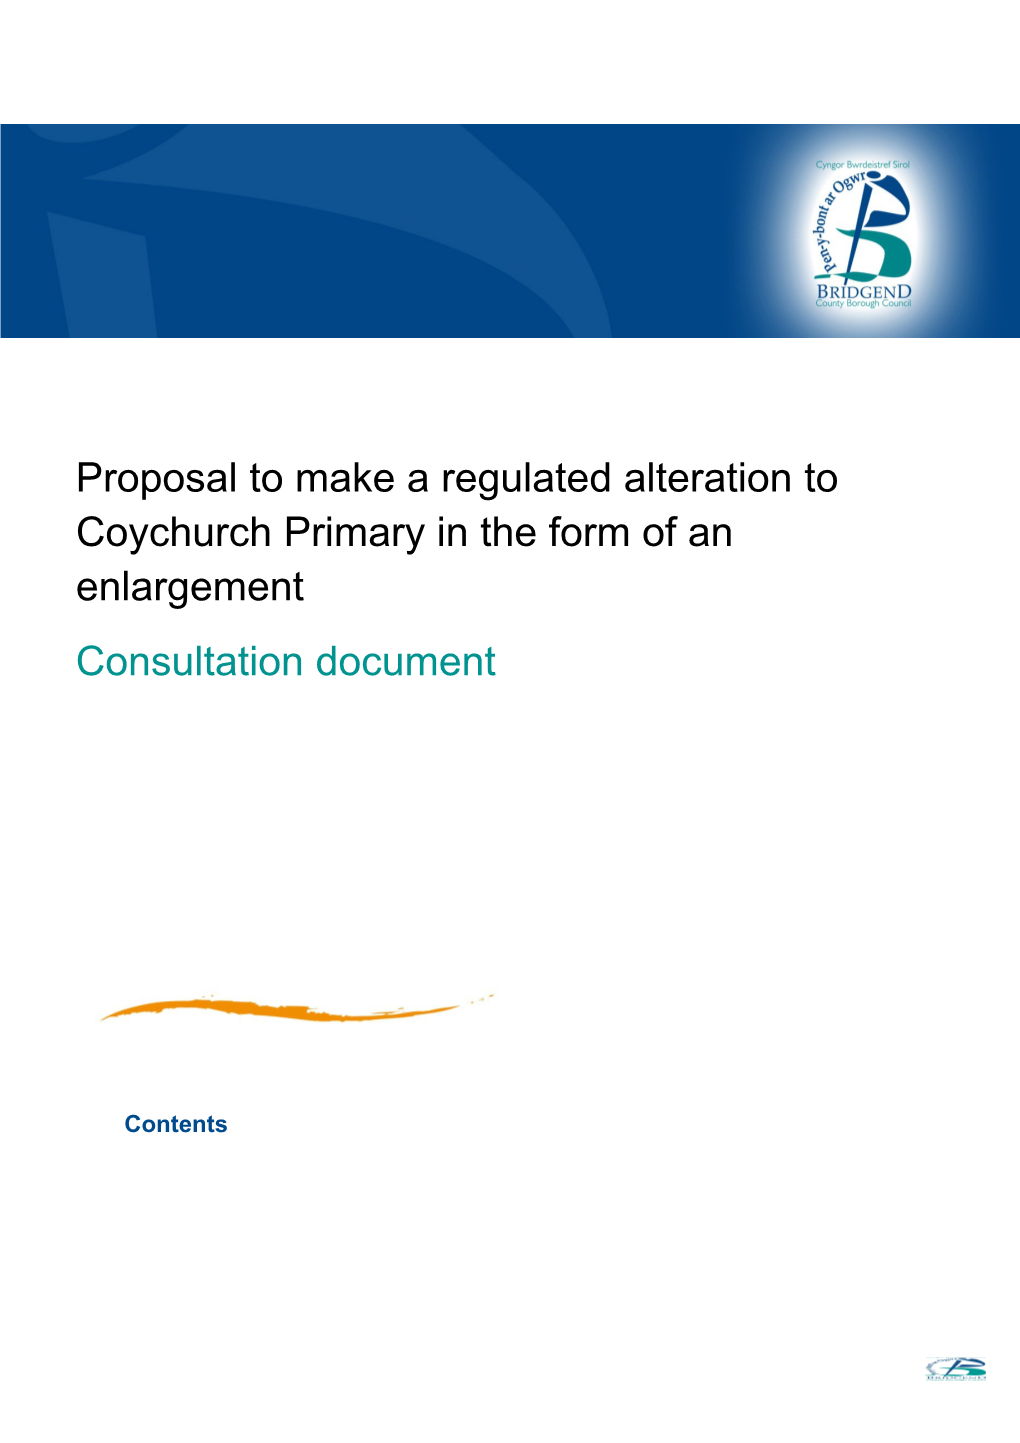 Proposal to Make a Regulated Alteration to Coychurch Primary in the Form of an Enlargement